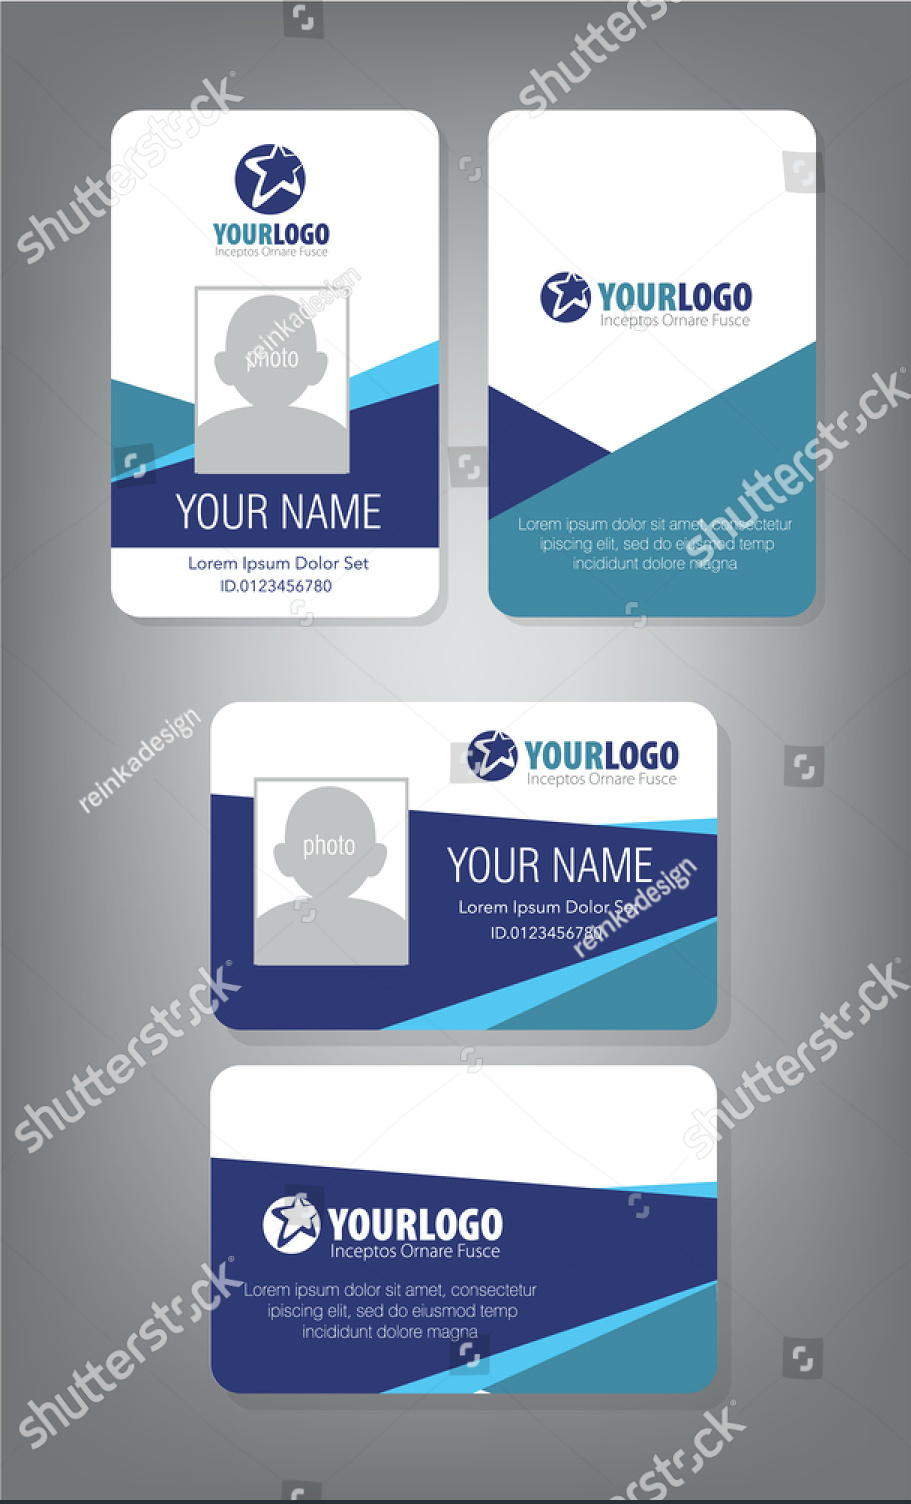 43+ Professional Id Card Designs – Psd, Eps, Ai, Word | Free With Regard To Photographer Id Card Template